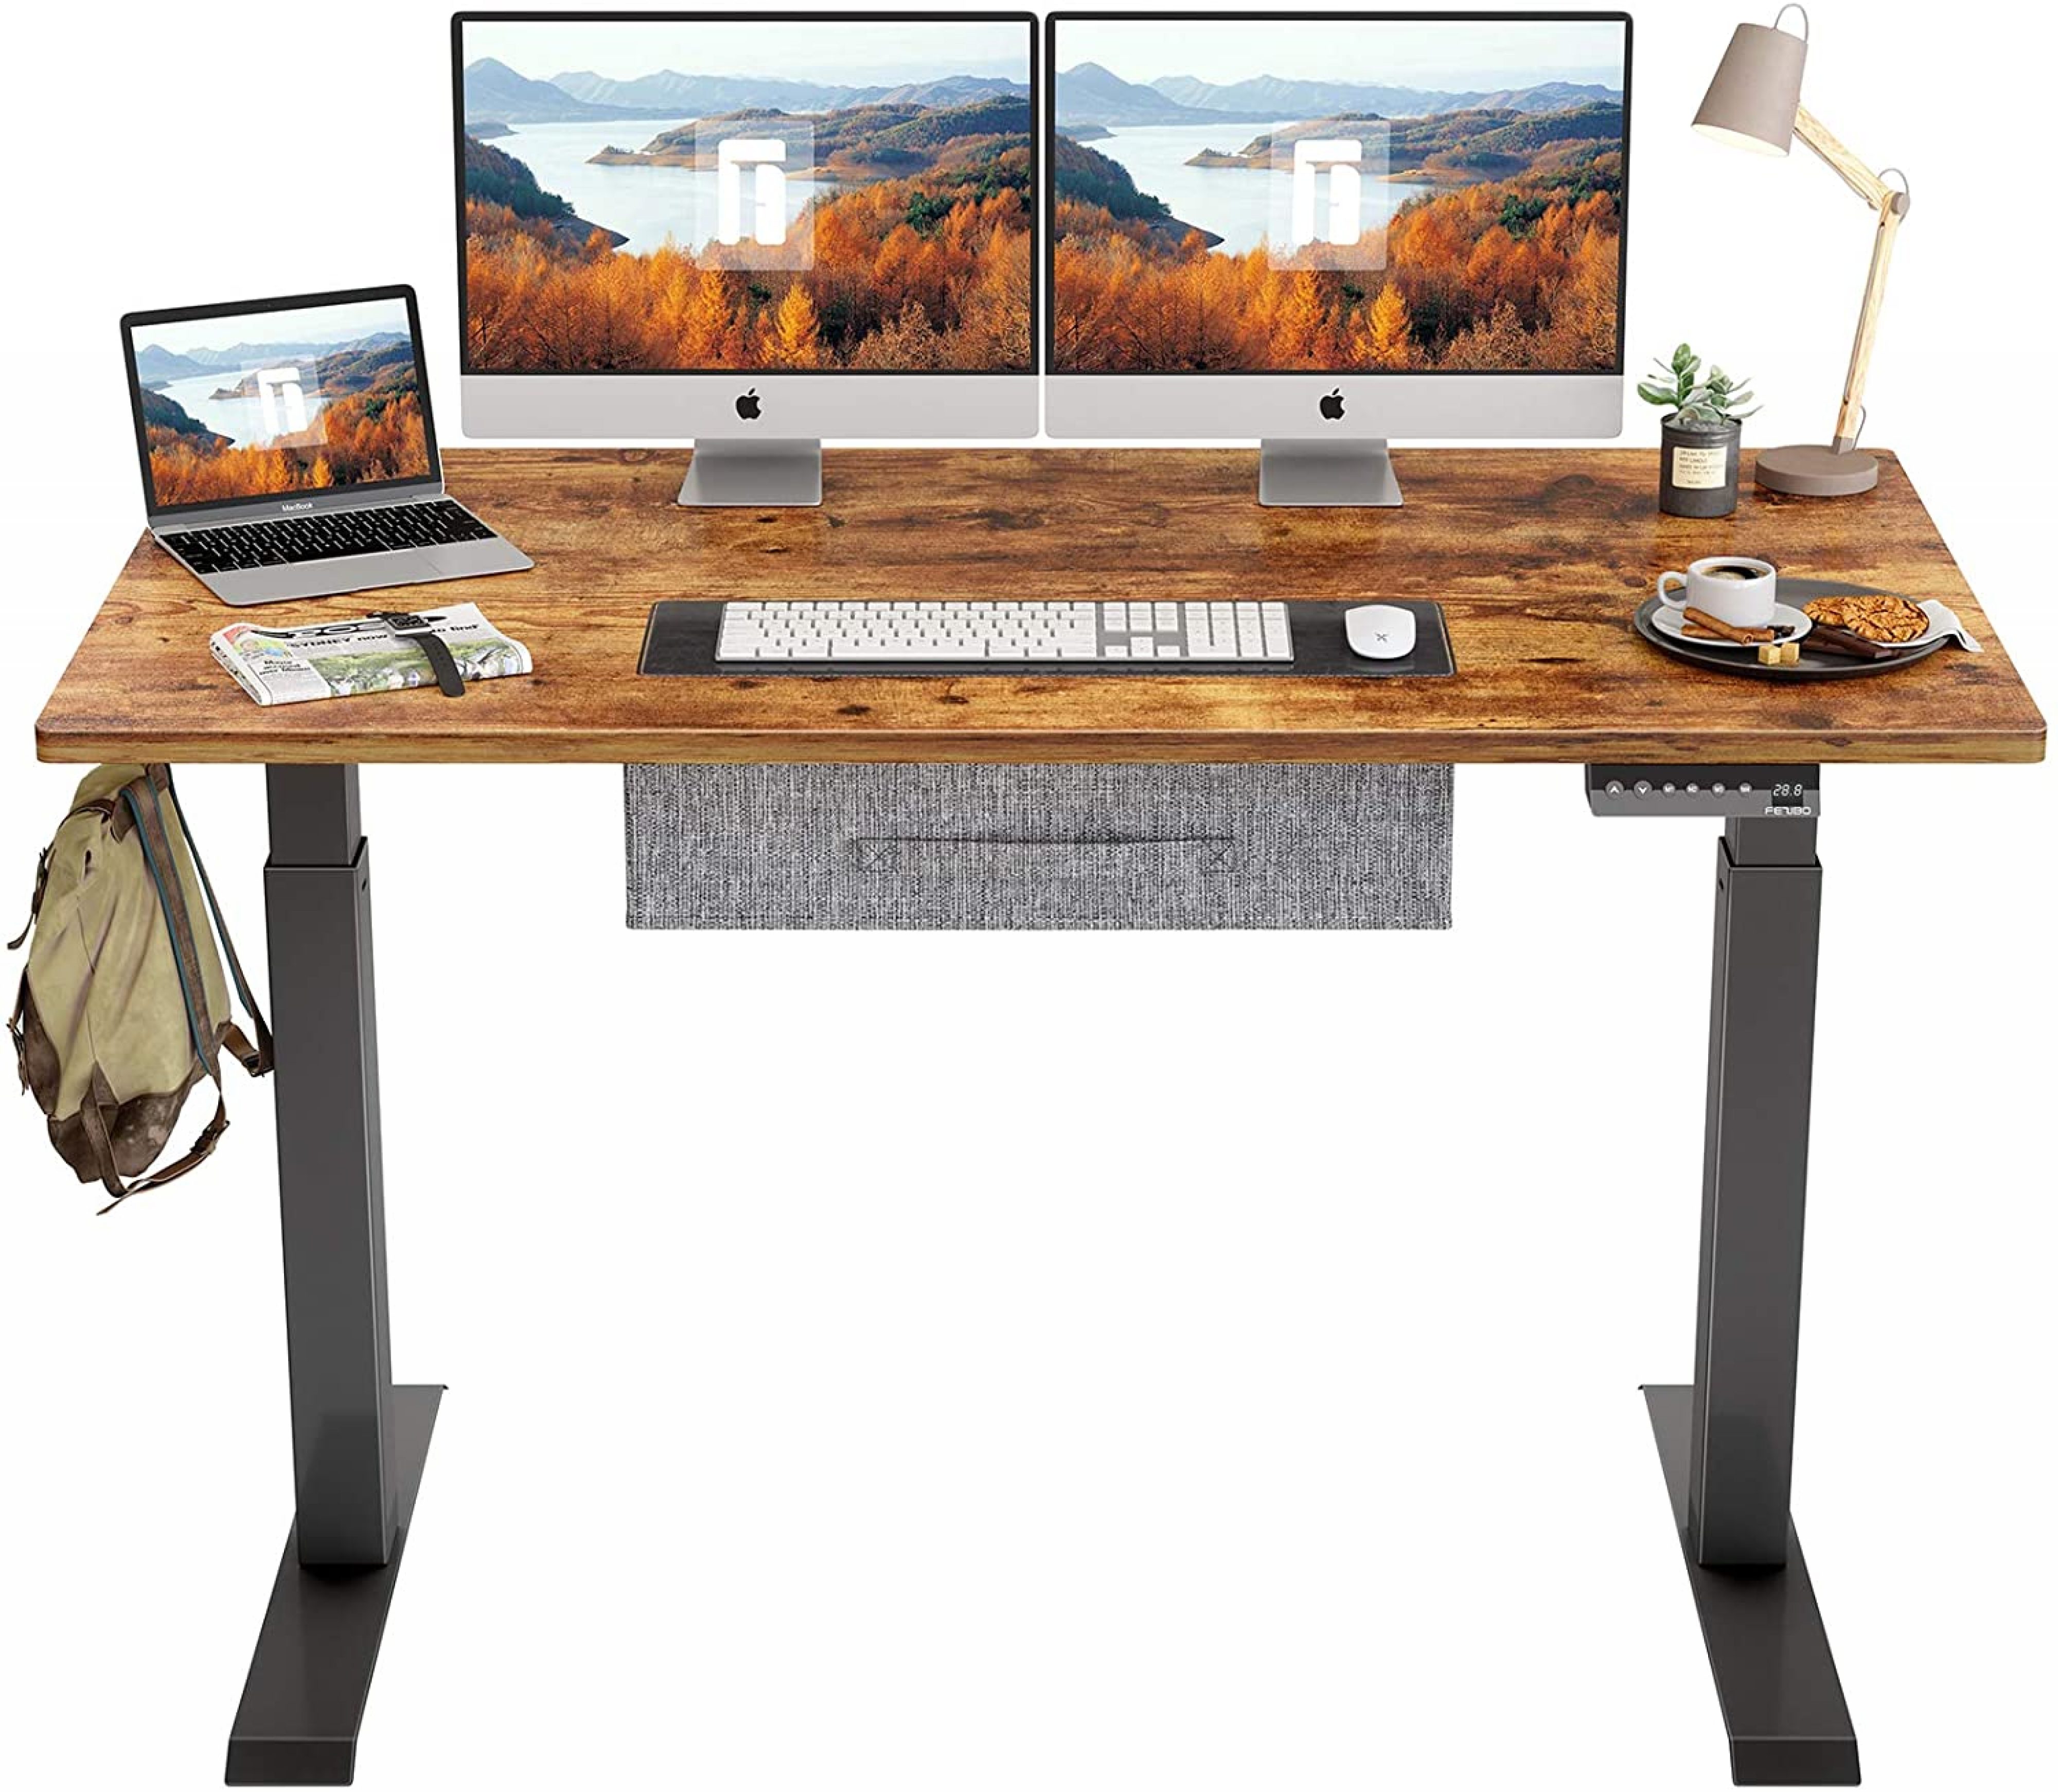 FEZIBO Electric Standing Desk Review